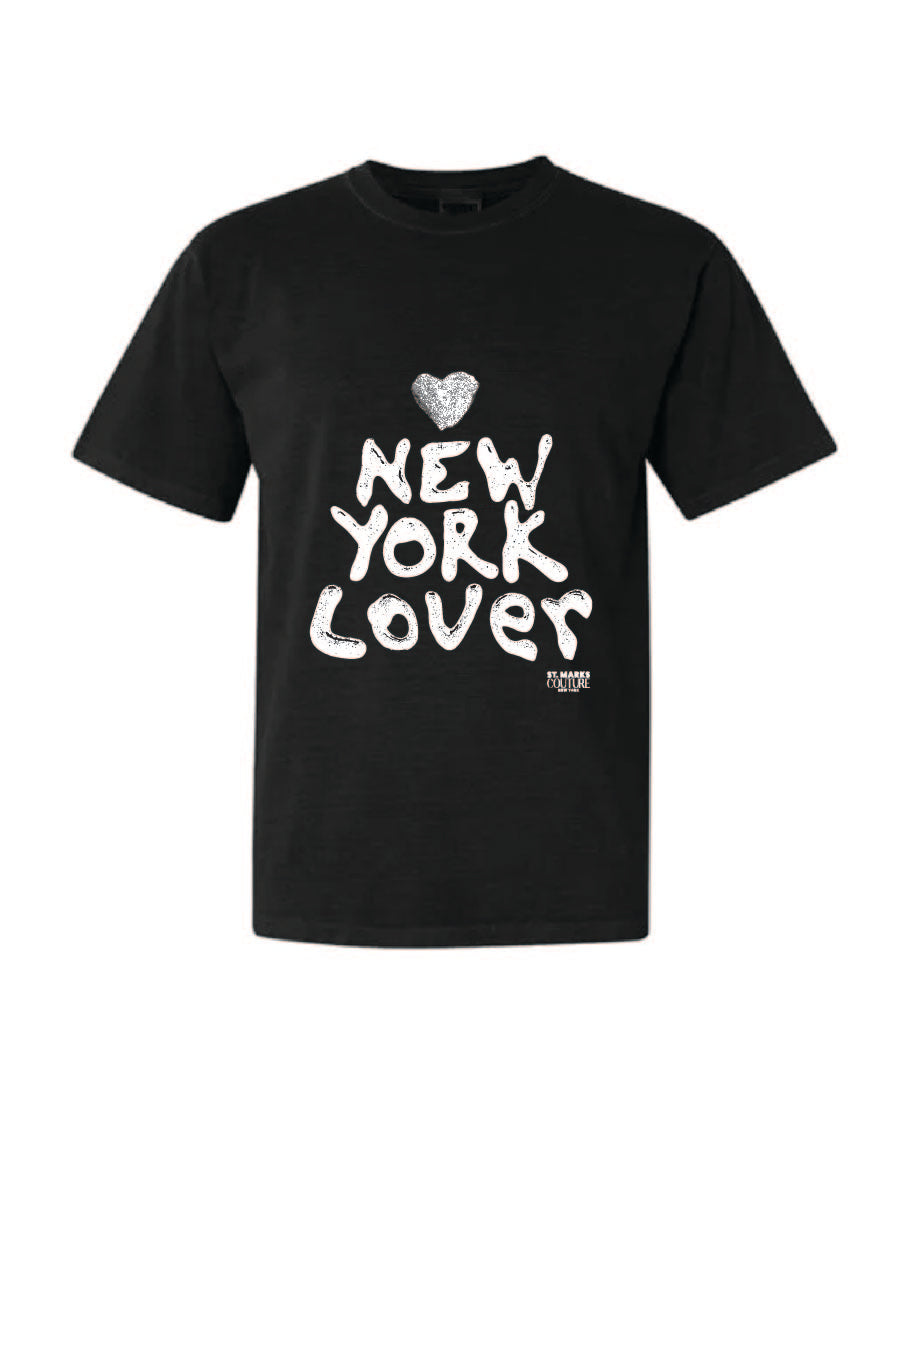 THE NEW YORK LOVER TEE